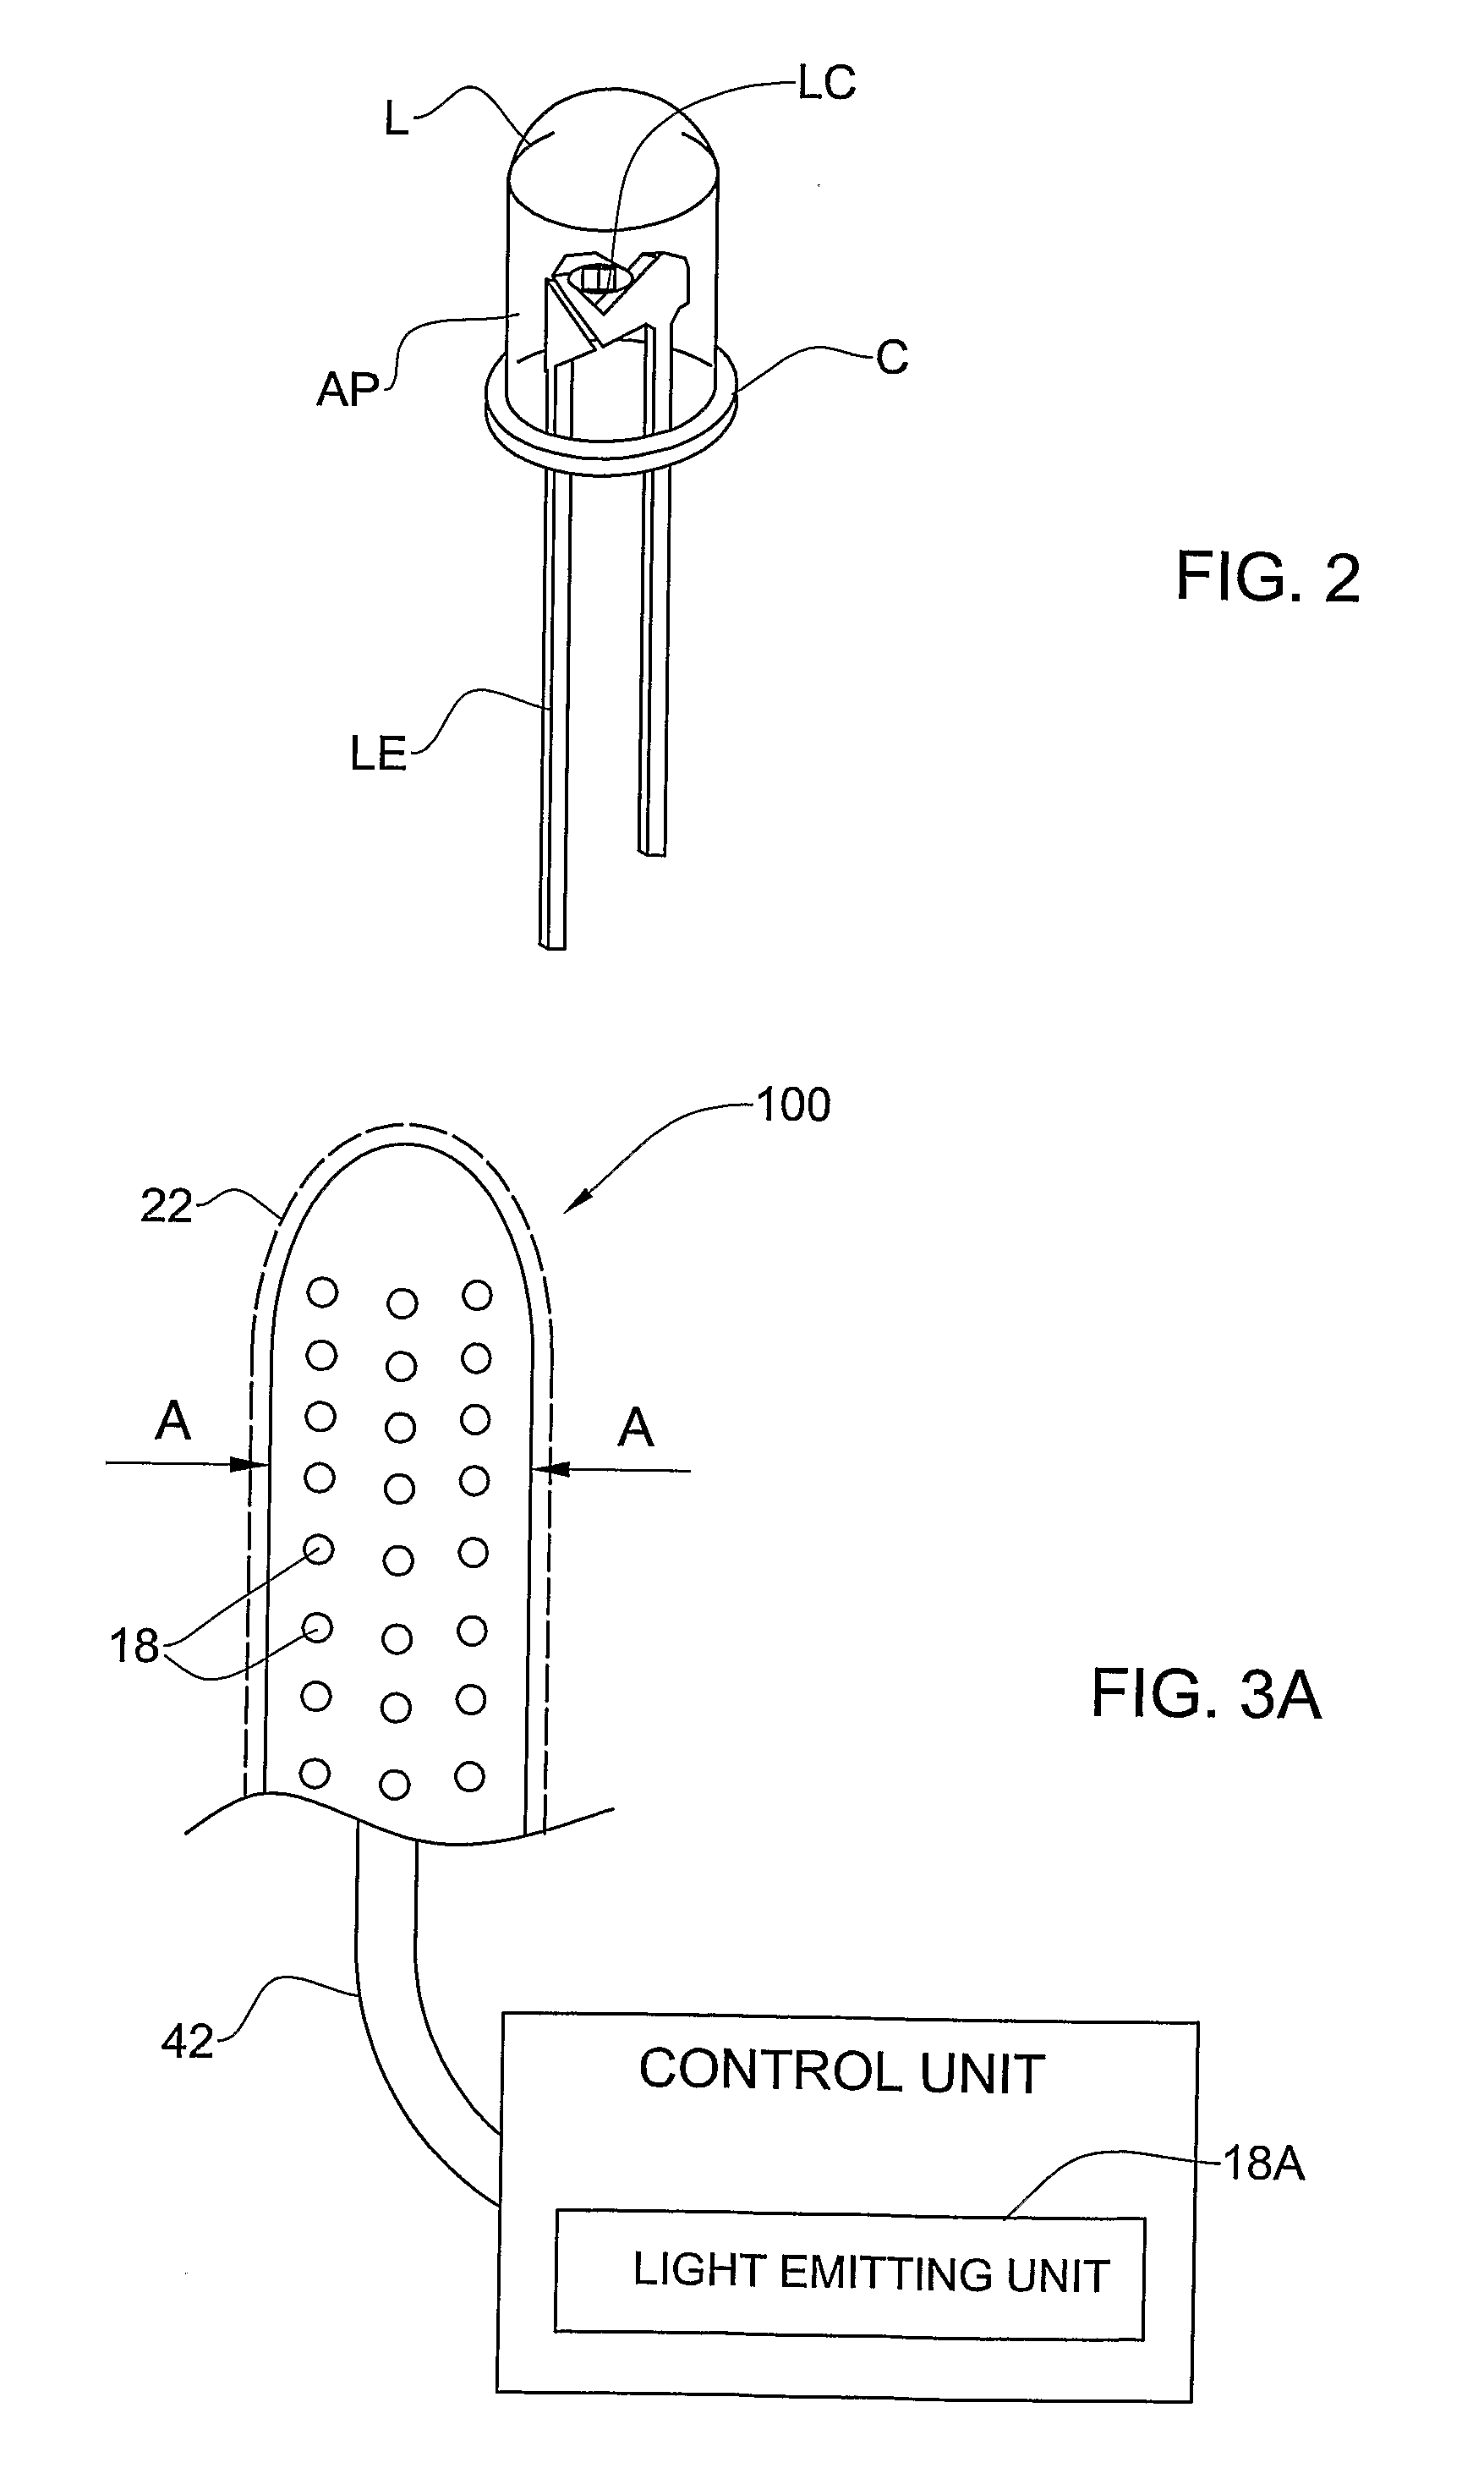 Probe device, system and method for photobiomodulation of tissue lining a body cavity